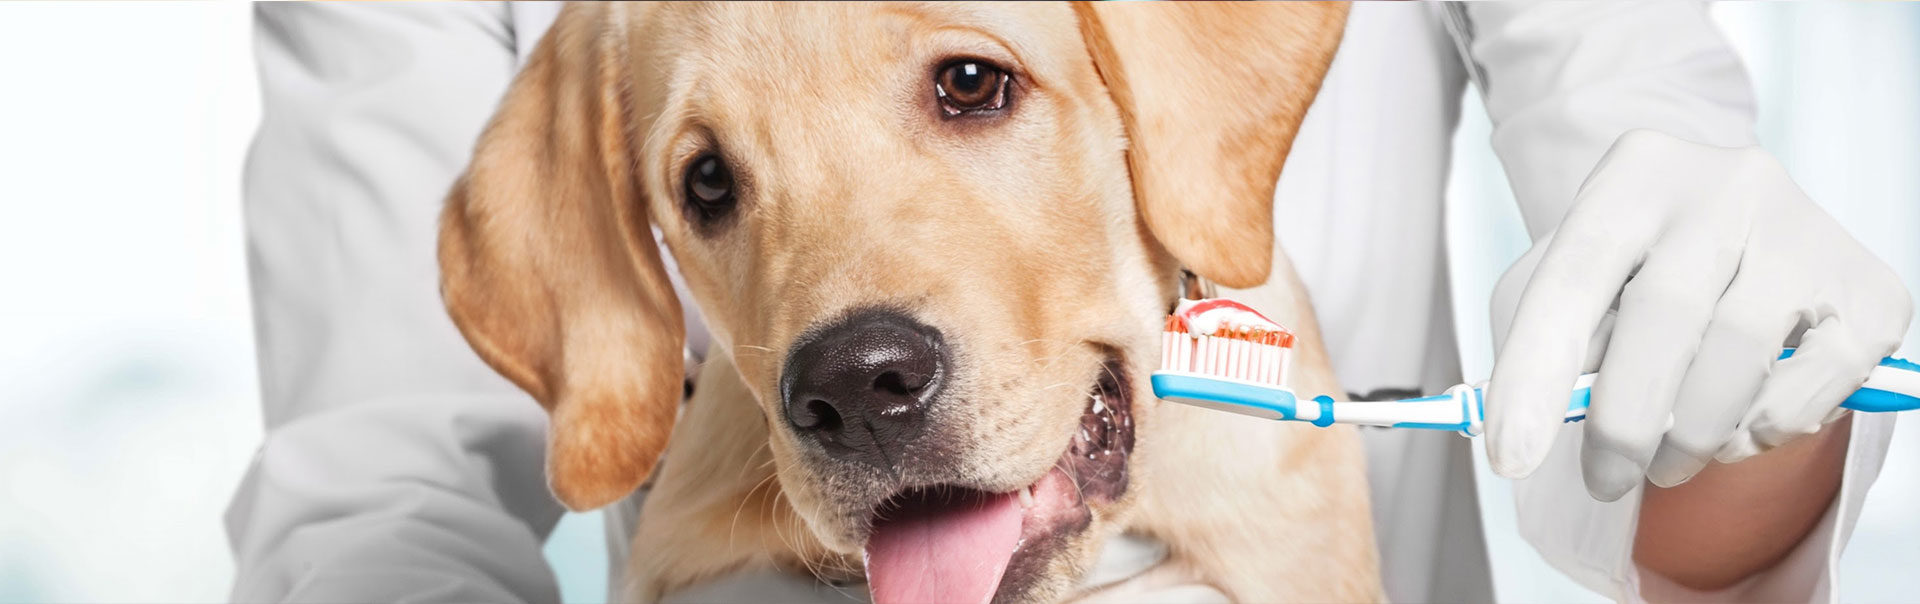 Veterinarian holding a toothbrush in front of a dog